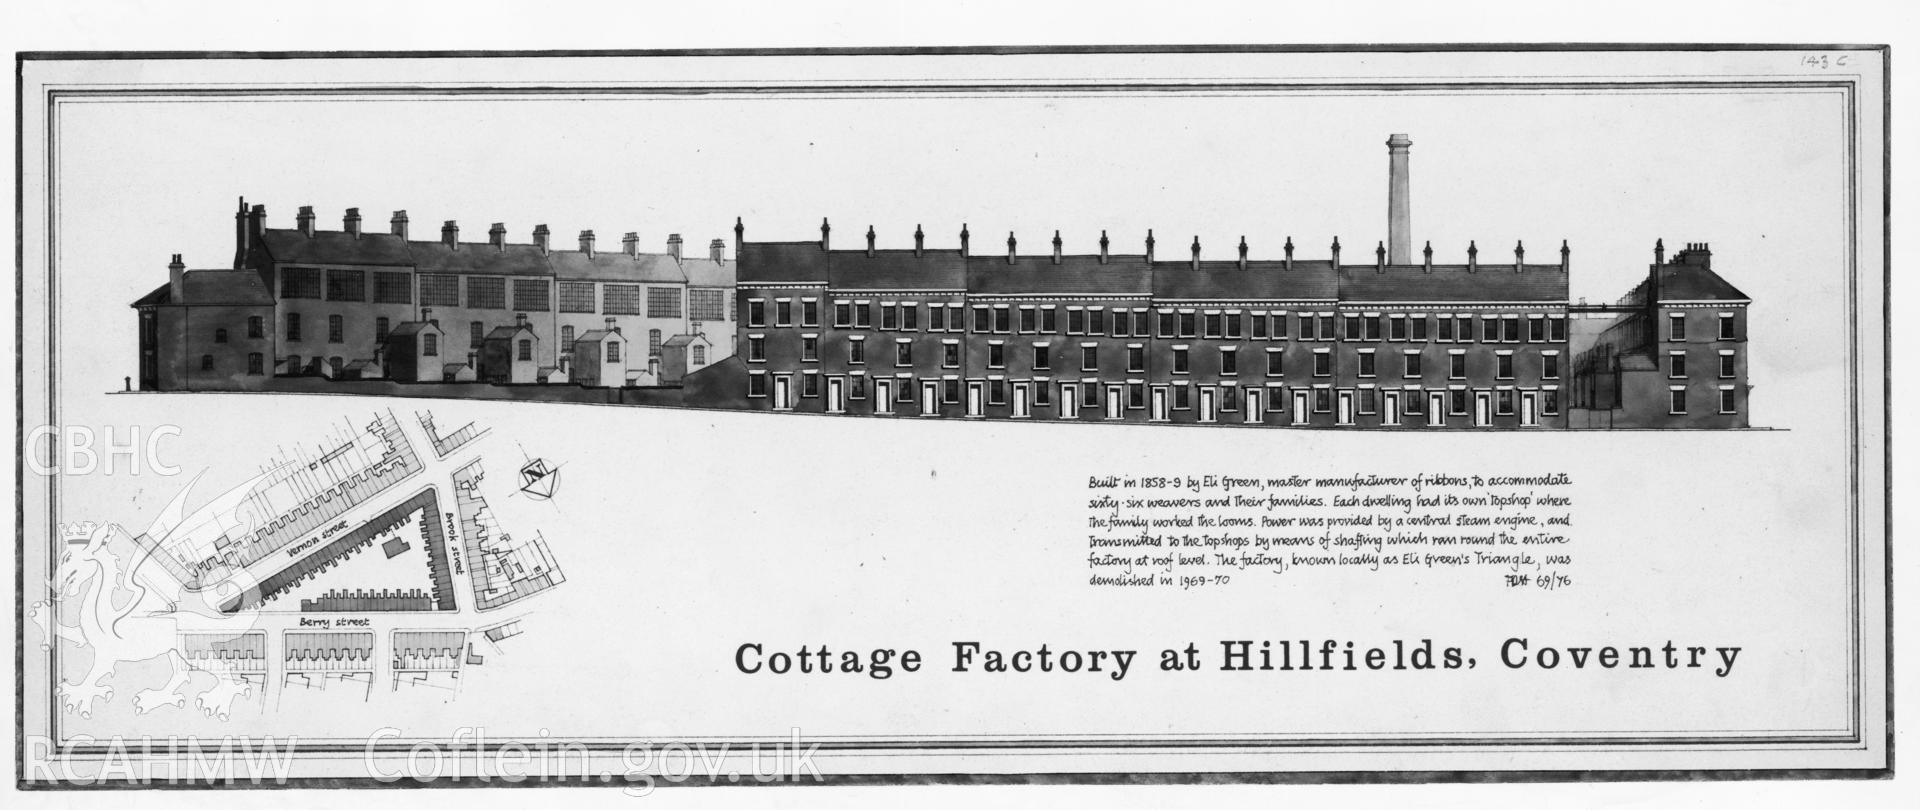 Eli Green's Cottage Factory, Coventry: gelatine print of  original (ink) tracing of plan, elevations and text.